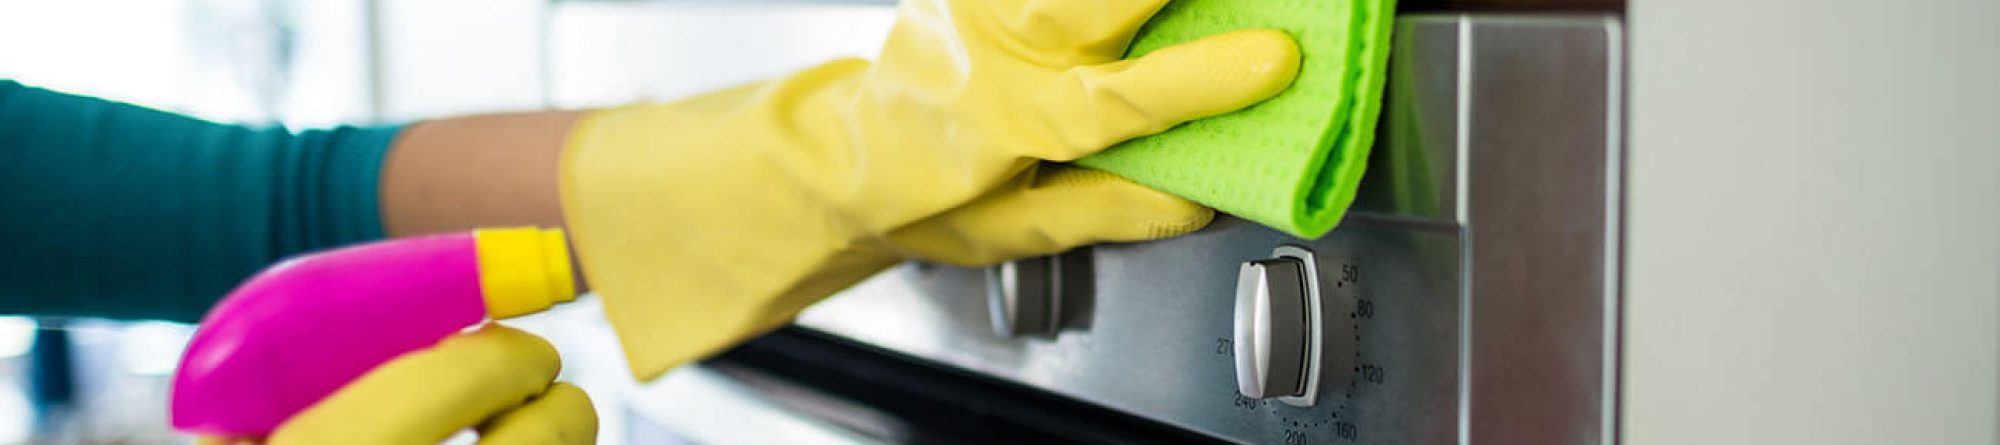 Oven Cleaning - Cleanhome Haywards Heath